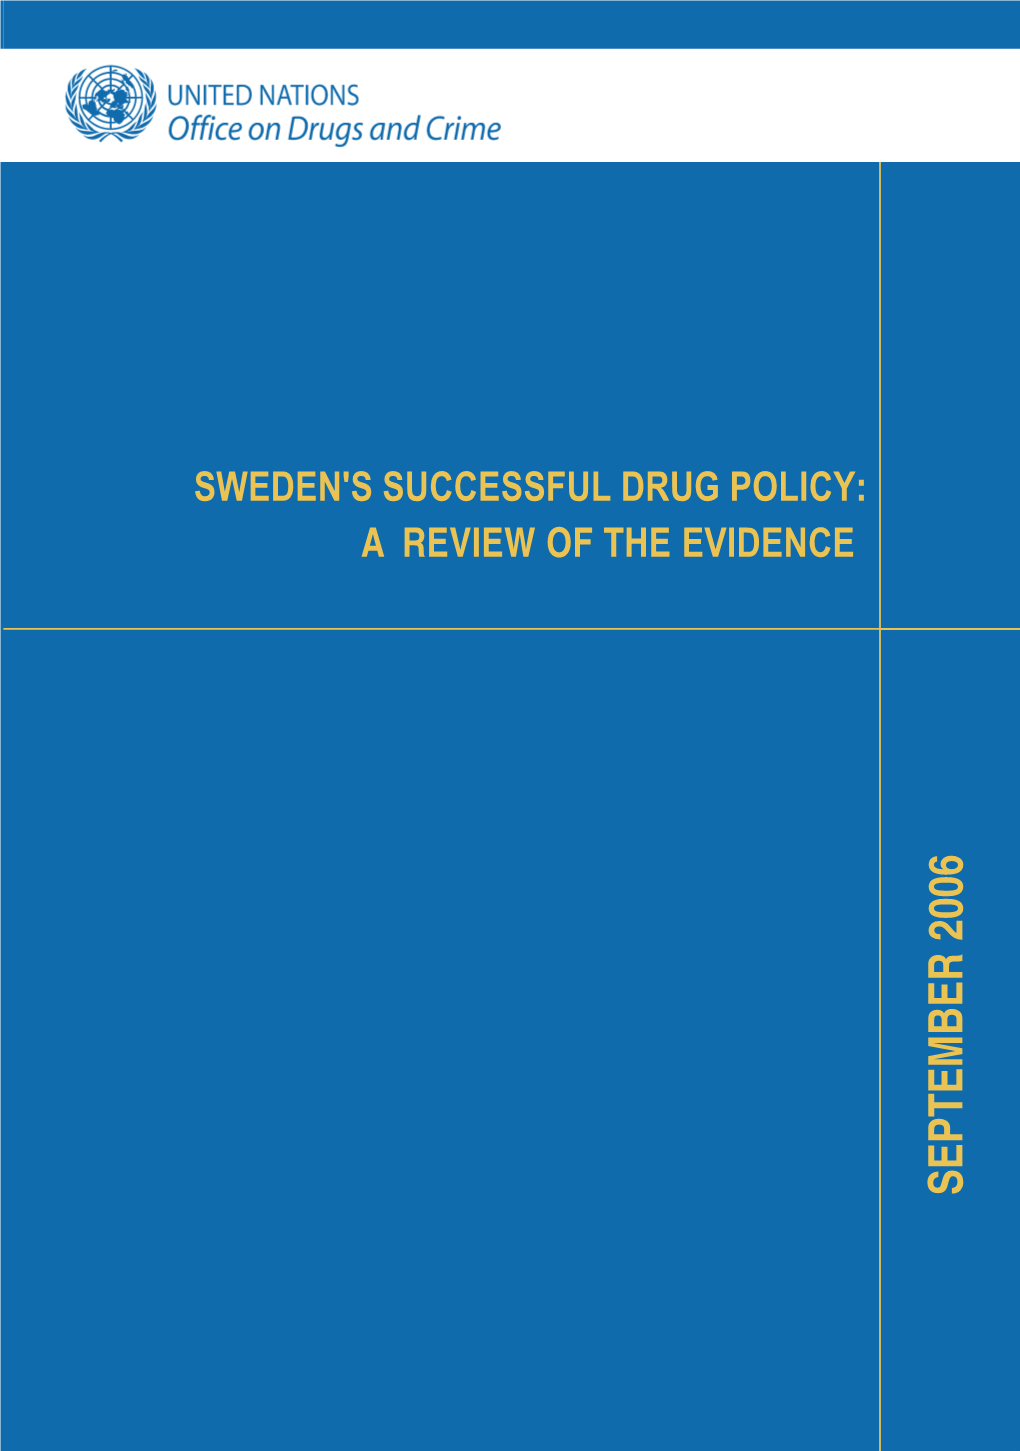 Sweden's Successful Drug Policy: a Review of the Evidence 2006 September